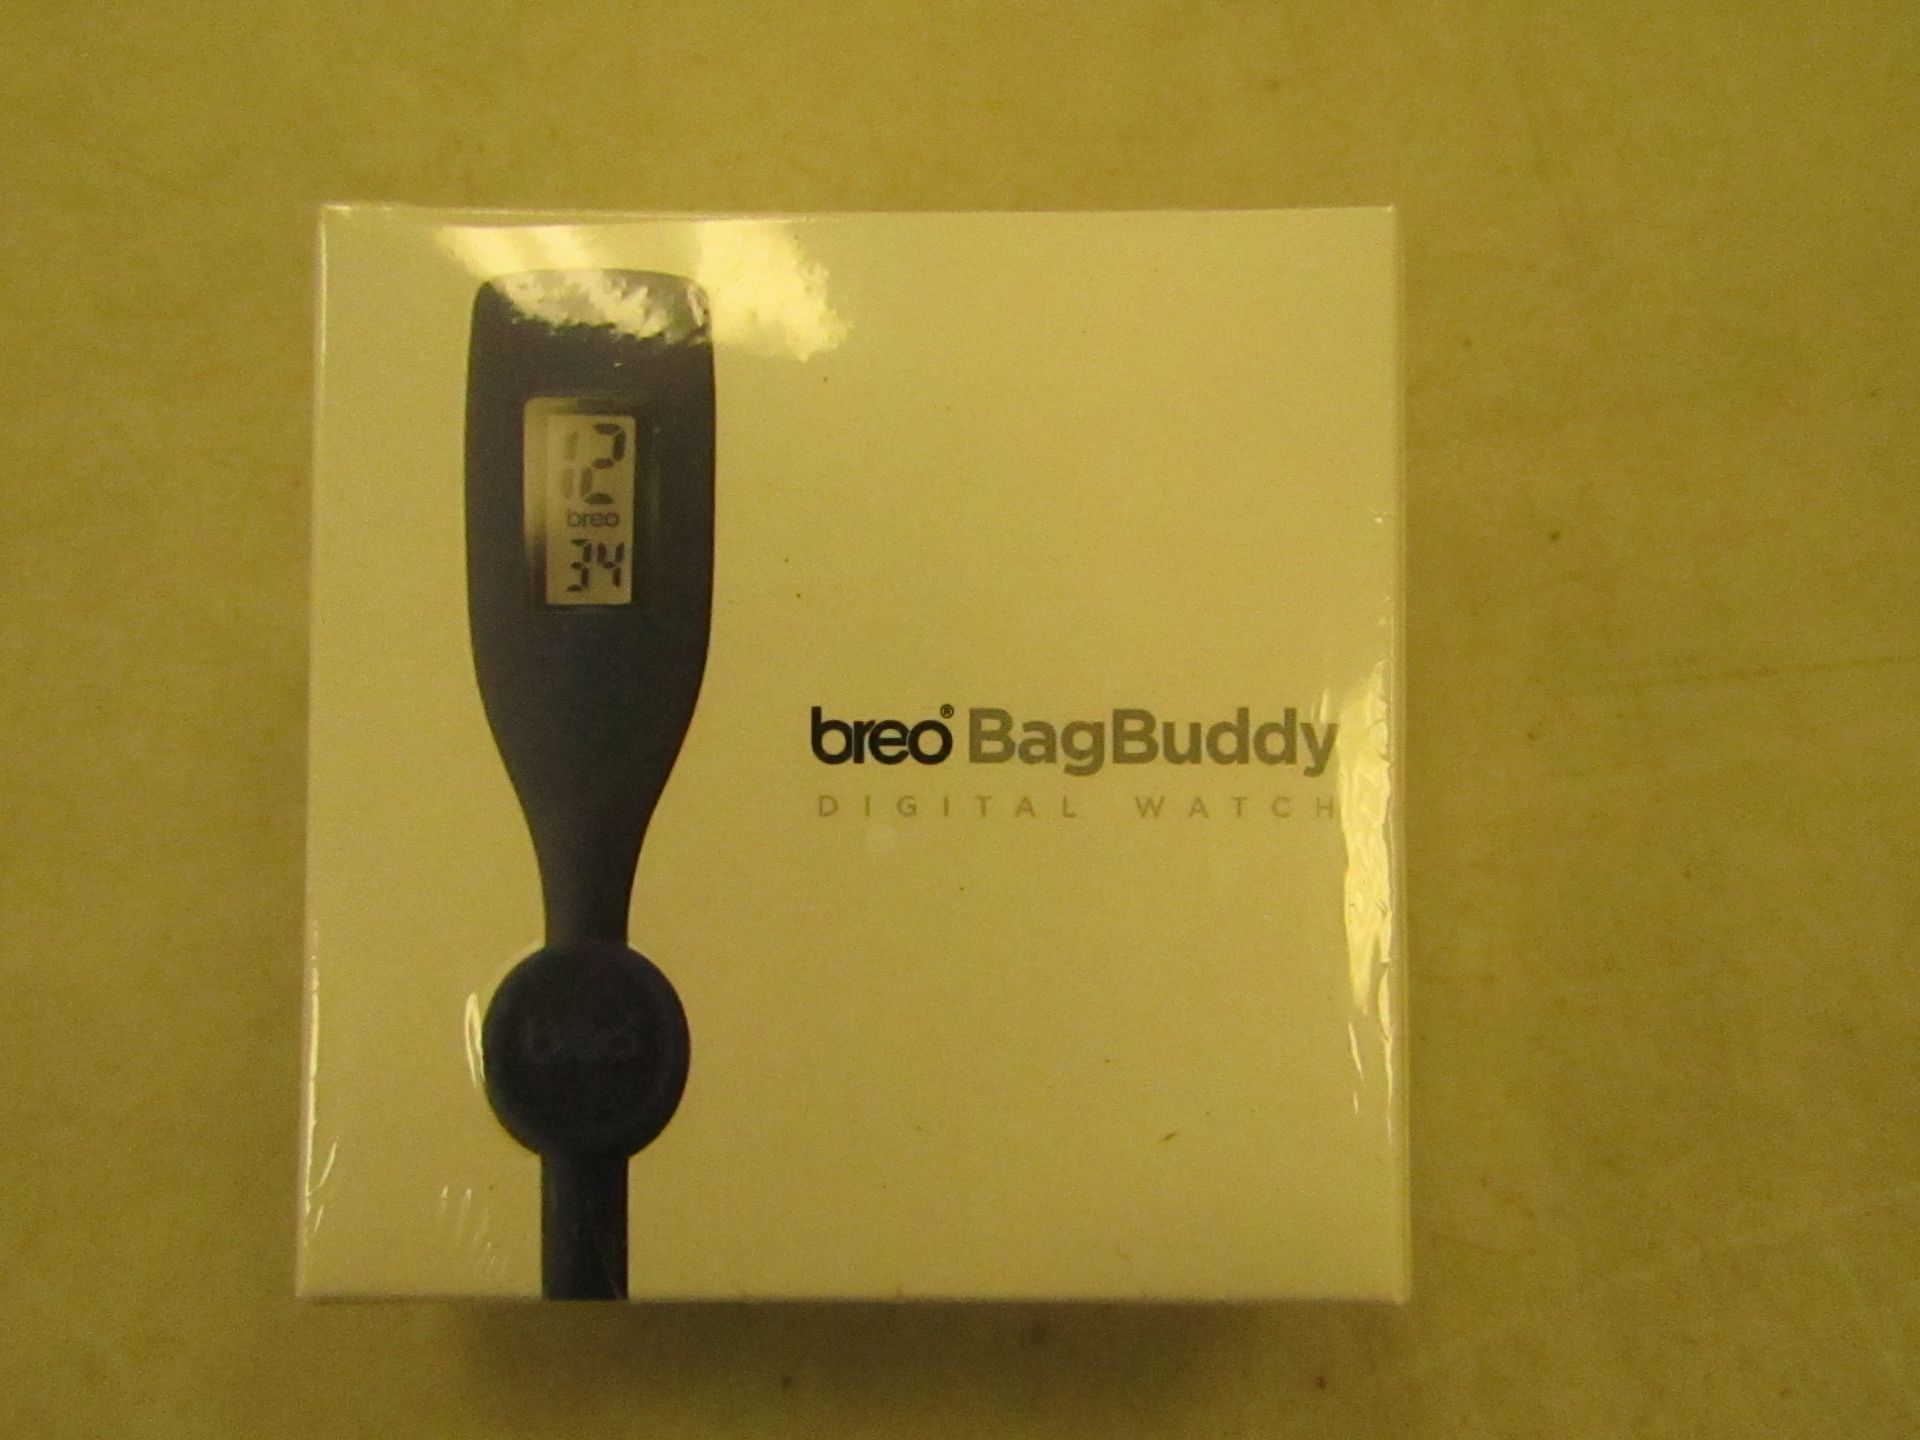 Breo Bag Buddy digital watch, new and boxed.